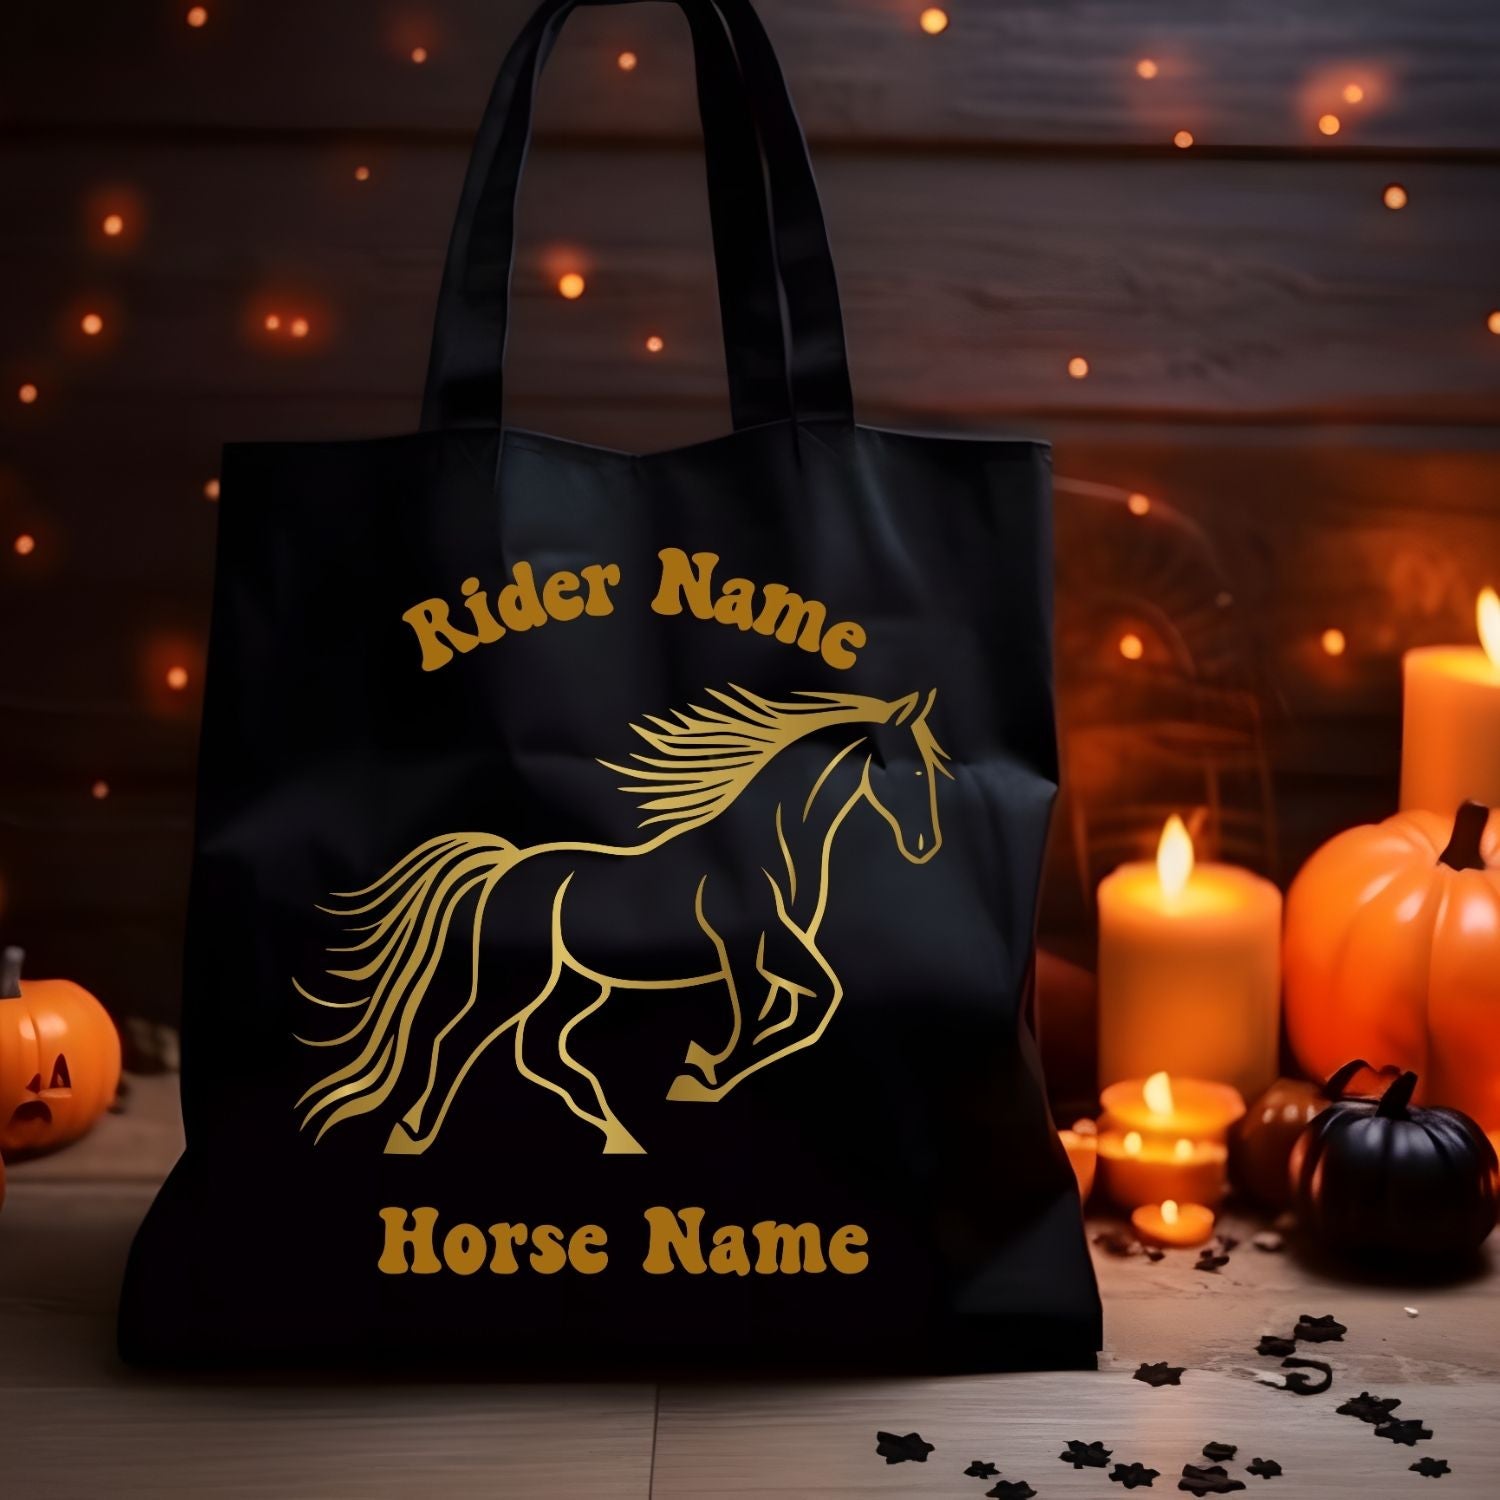 Personalized Horse Tote Bag - Perfect Gift for Horse Lovers Accessories   